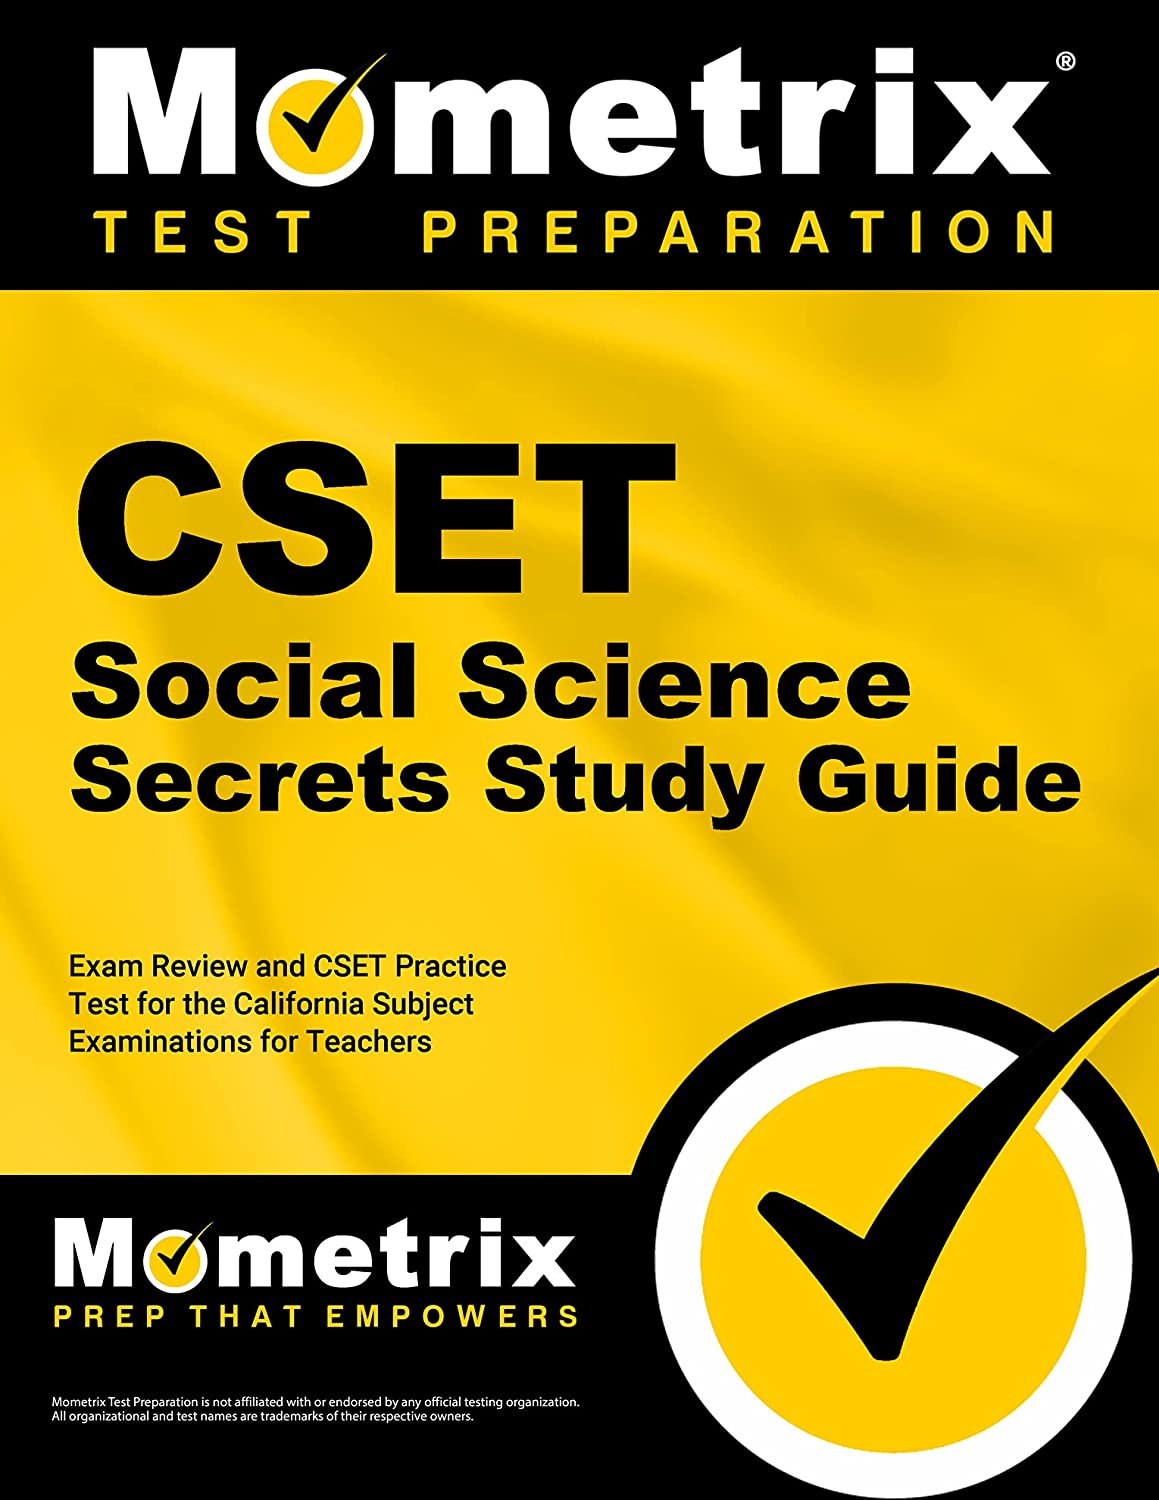 CSET Social Science Secrets Study Guide – Exam Review and CSET Practice Test for the California Subject Examinations for Teachers [2nd Edition]